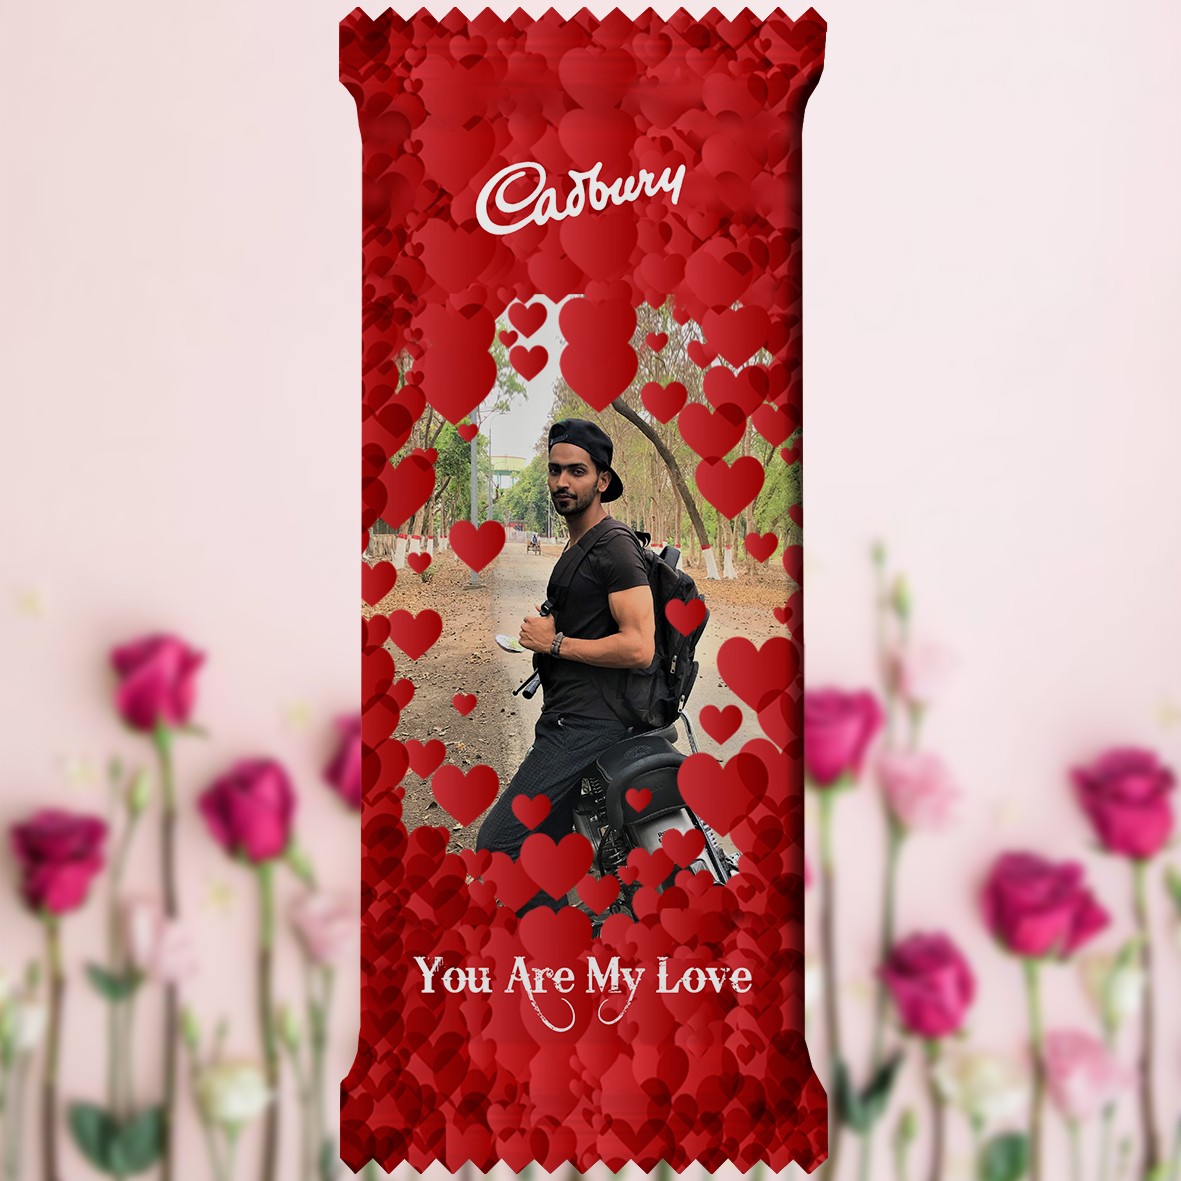 Valentine's Day Special Cadbury Dairy Milk Fruit and Nut (80g) wrapped in Customized Photo Printed Wrapper (Type 02)